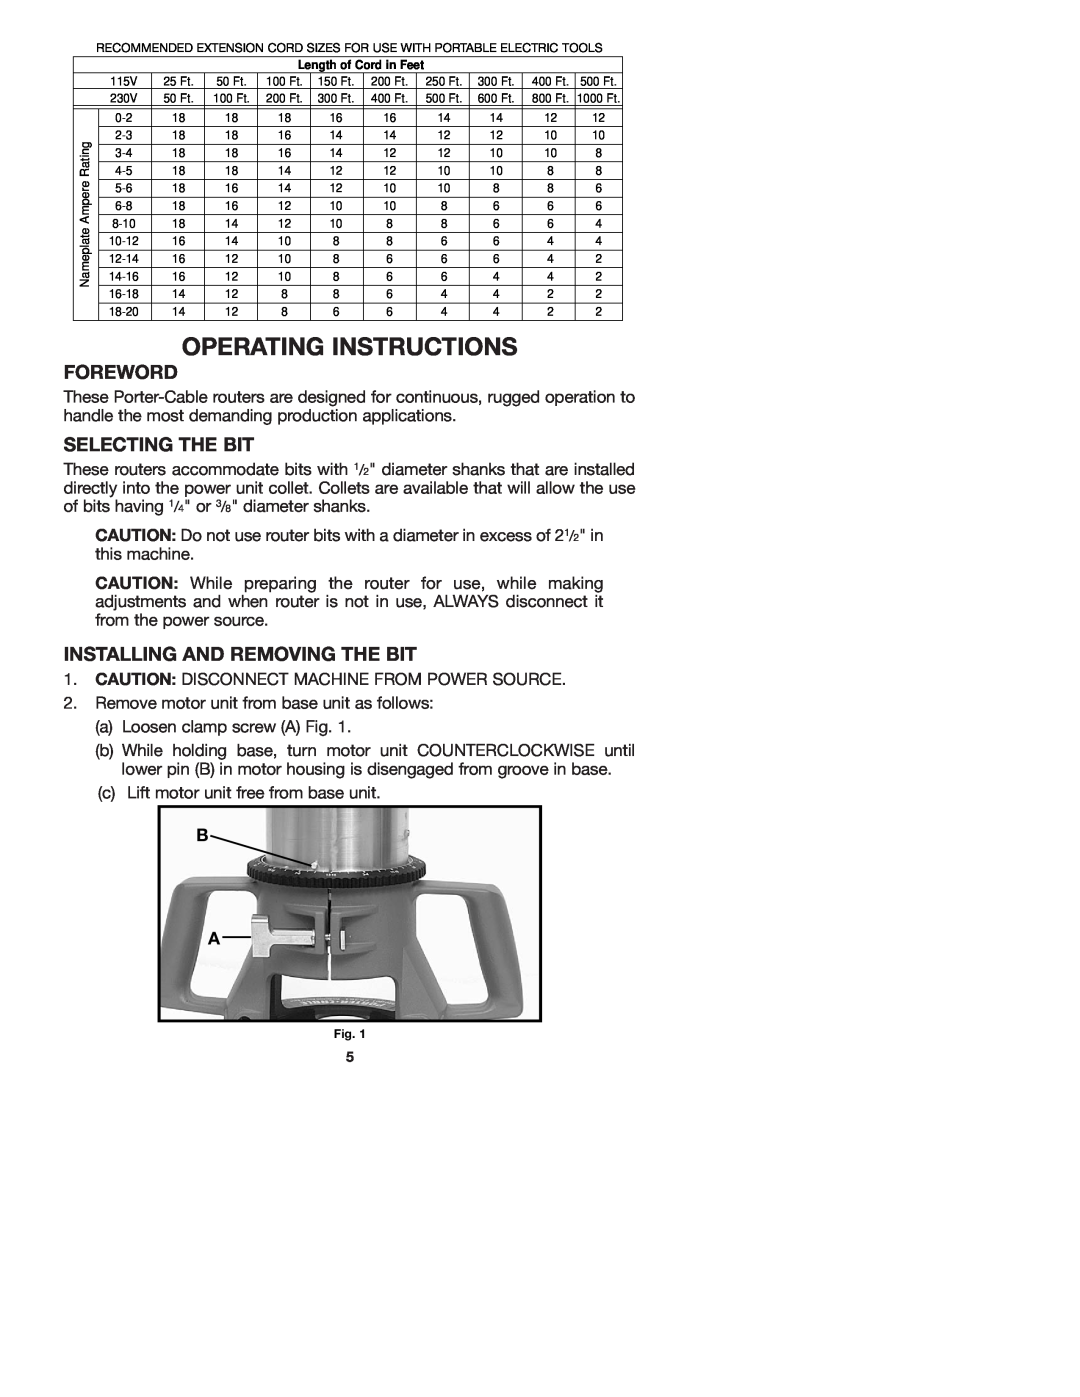 Porter-Cable 7536 instruction manual Operating Instructions, Foreword, Selecting The Bit, Installing And Removing The Bit 